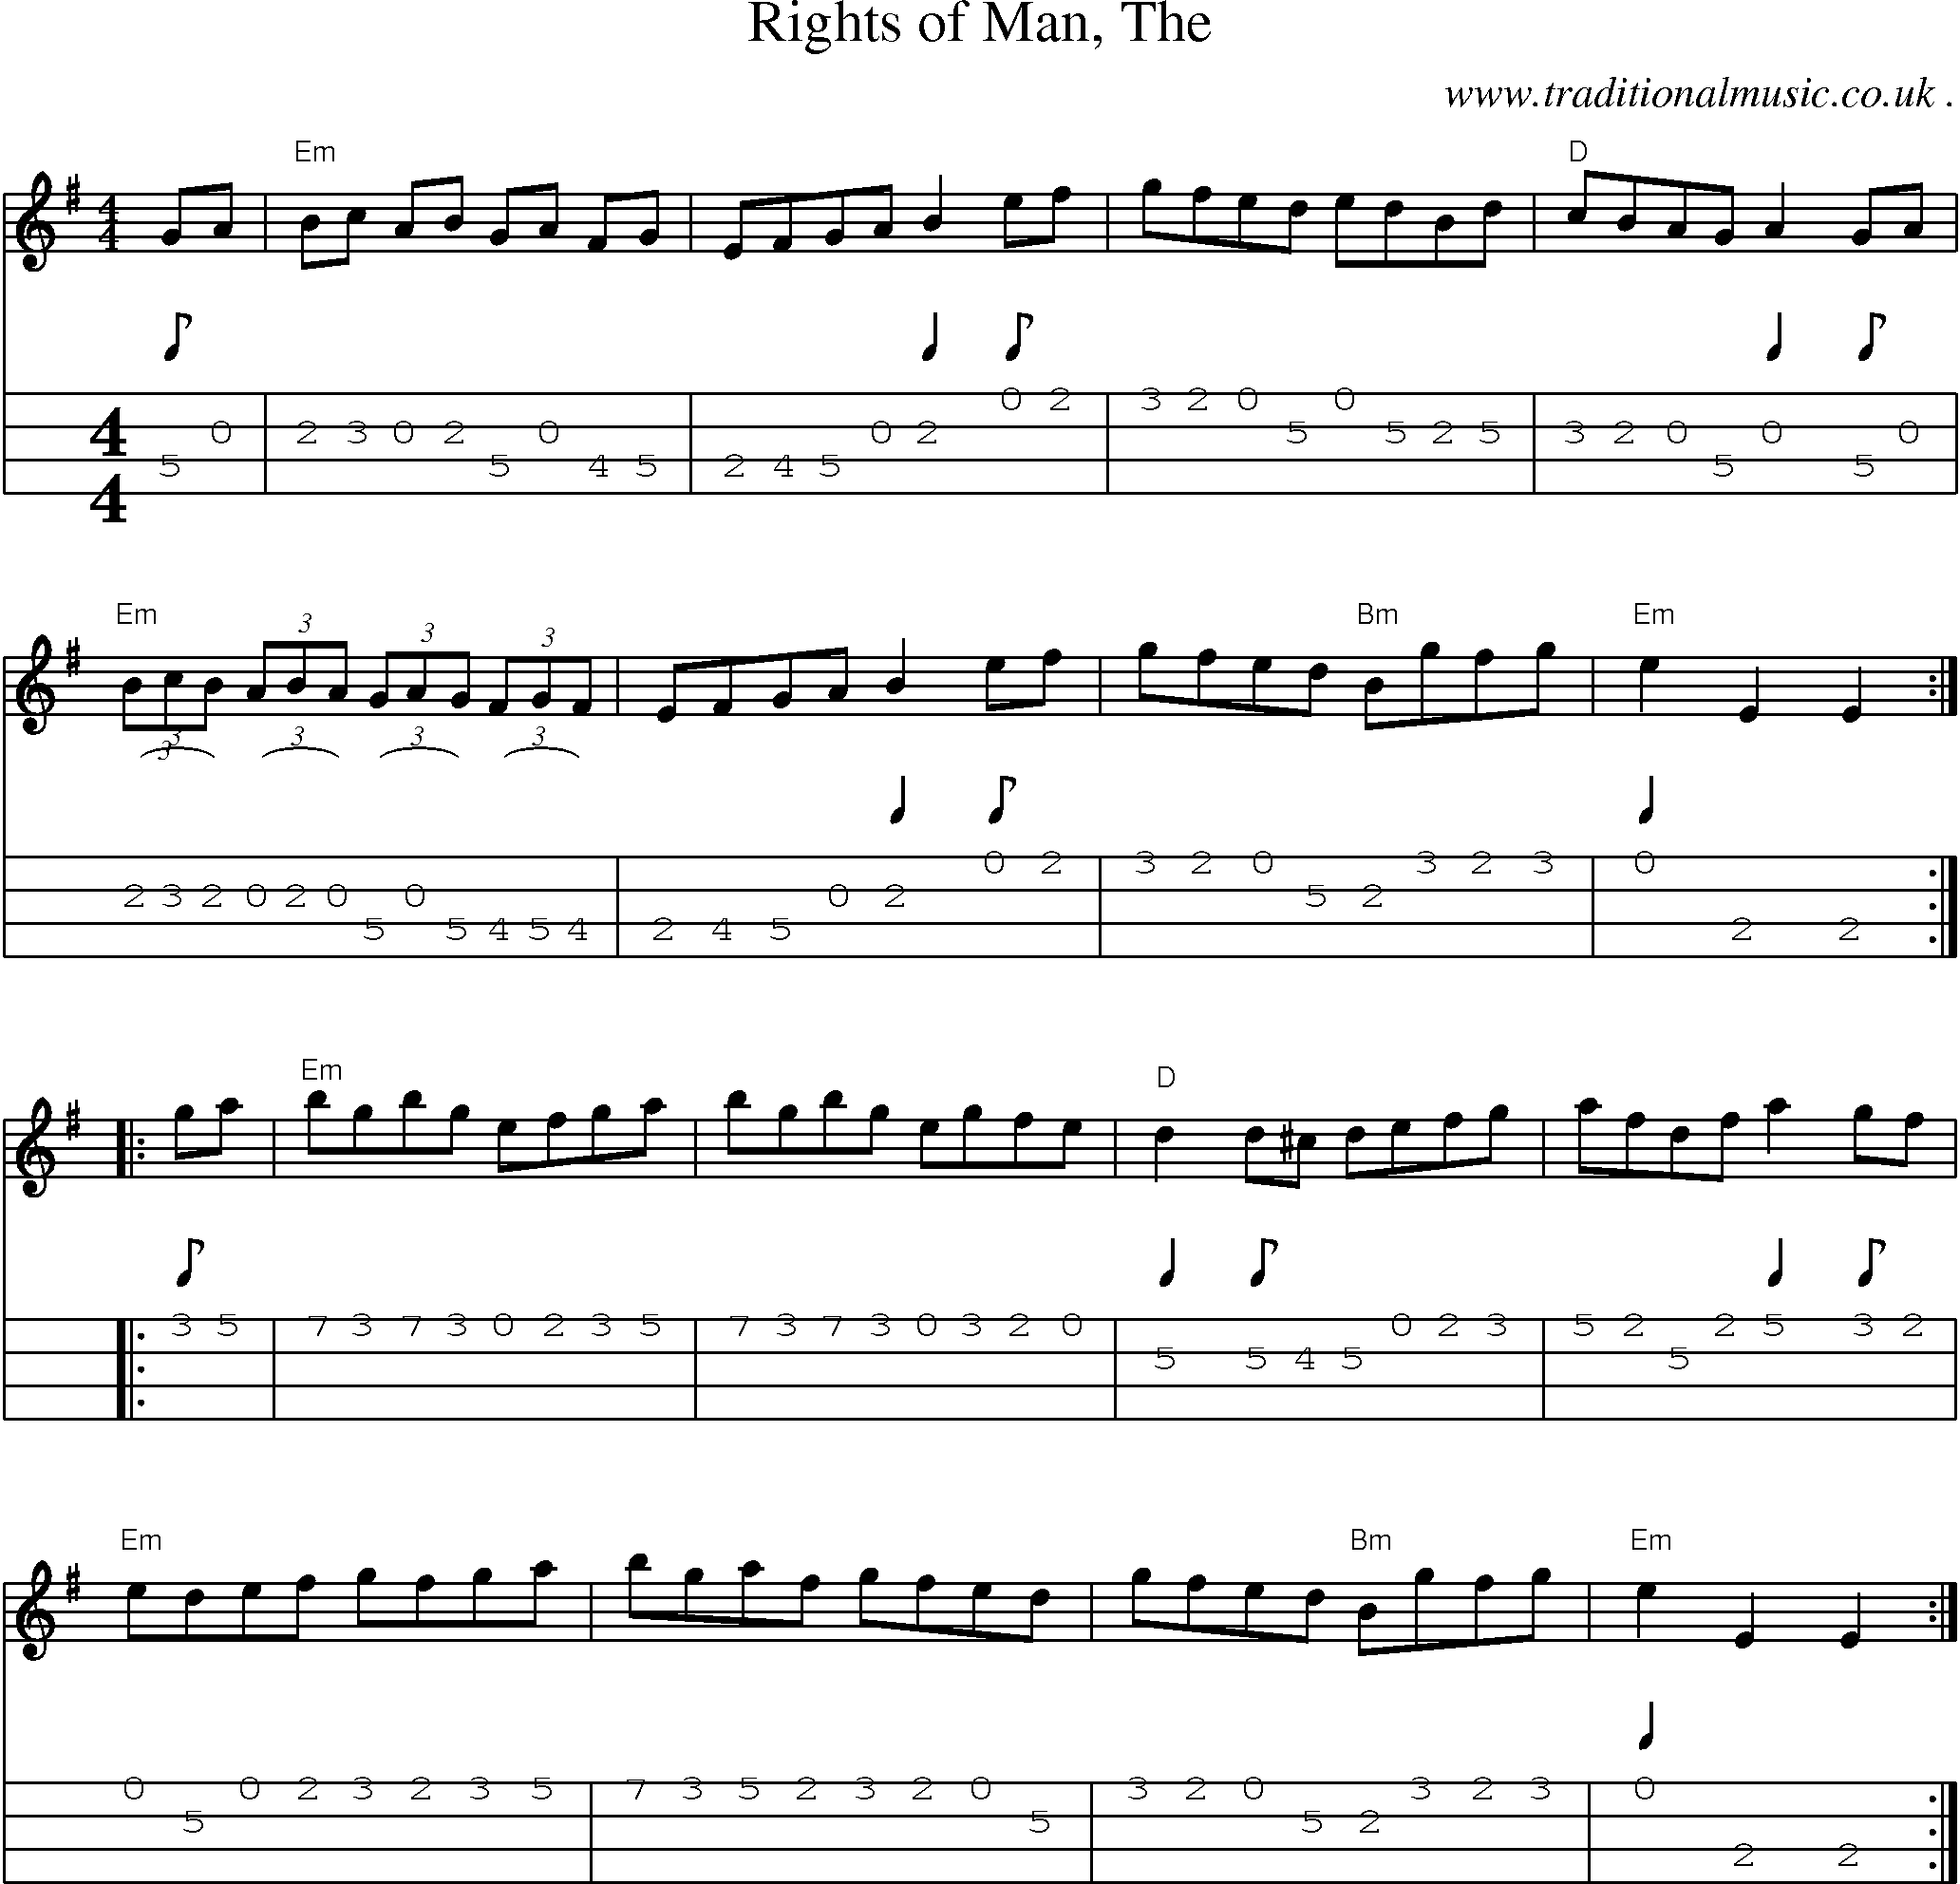 Music Score and Guitar Tabs for Rights of Man The1